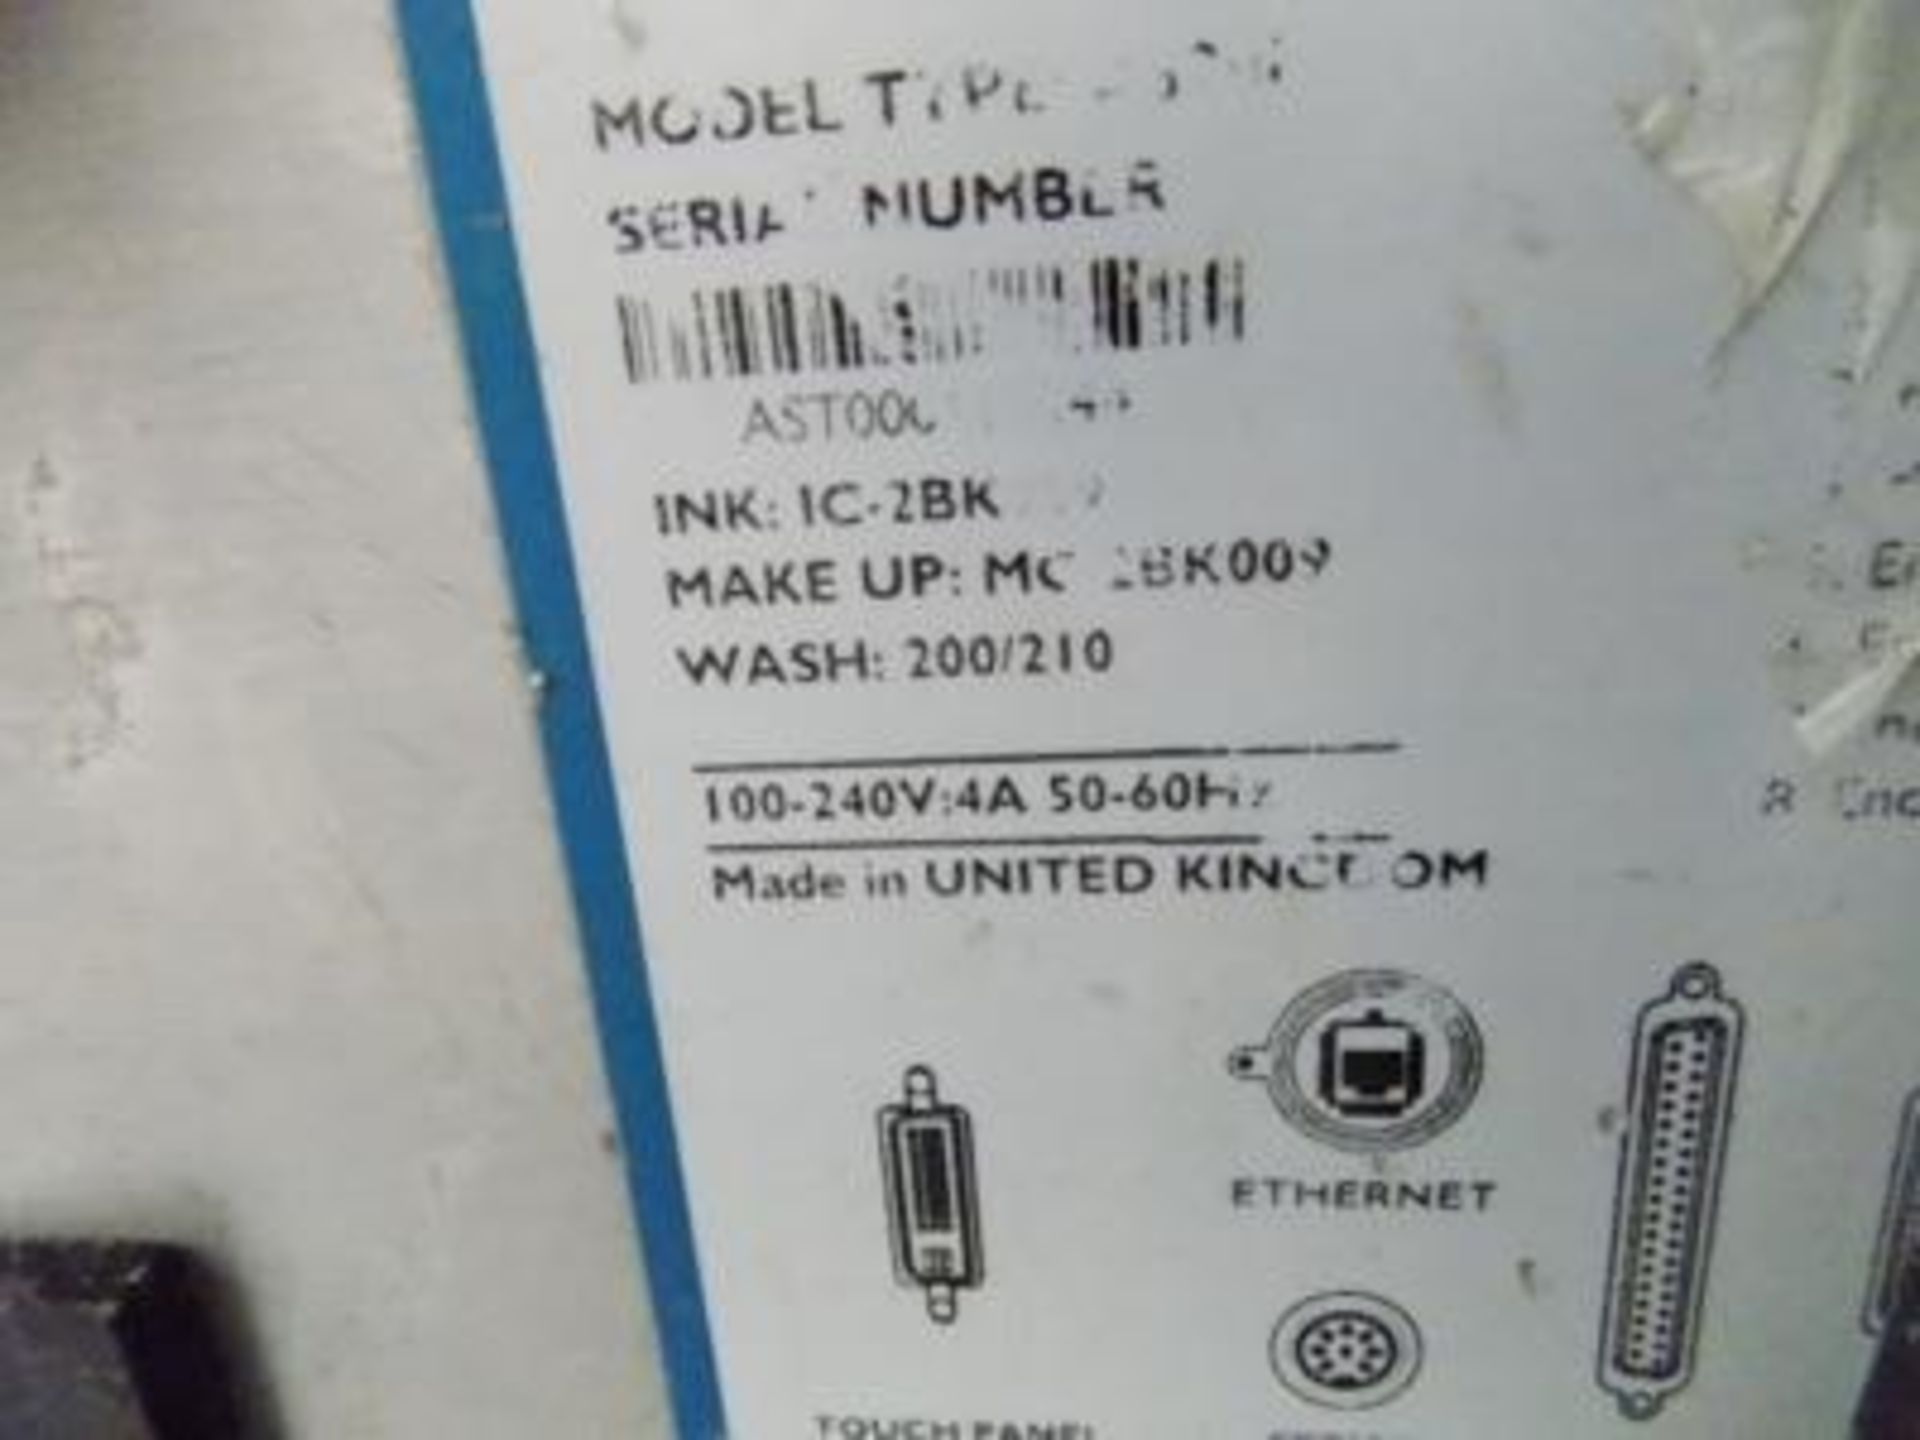 Domino ink jet coder - MODEL# A520i - Serial # not available. - Image 2 of 2